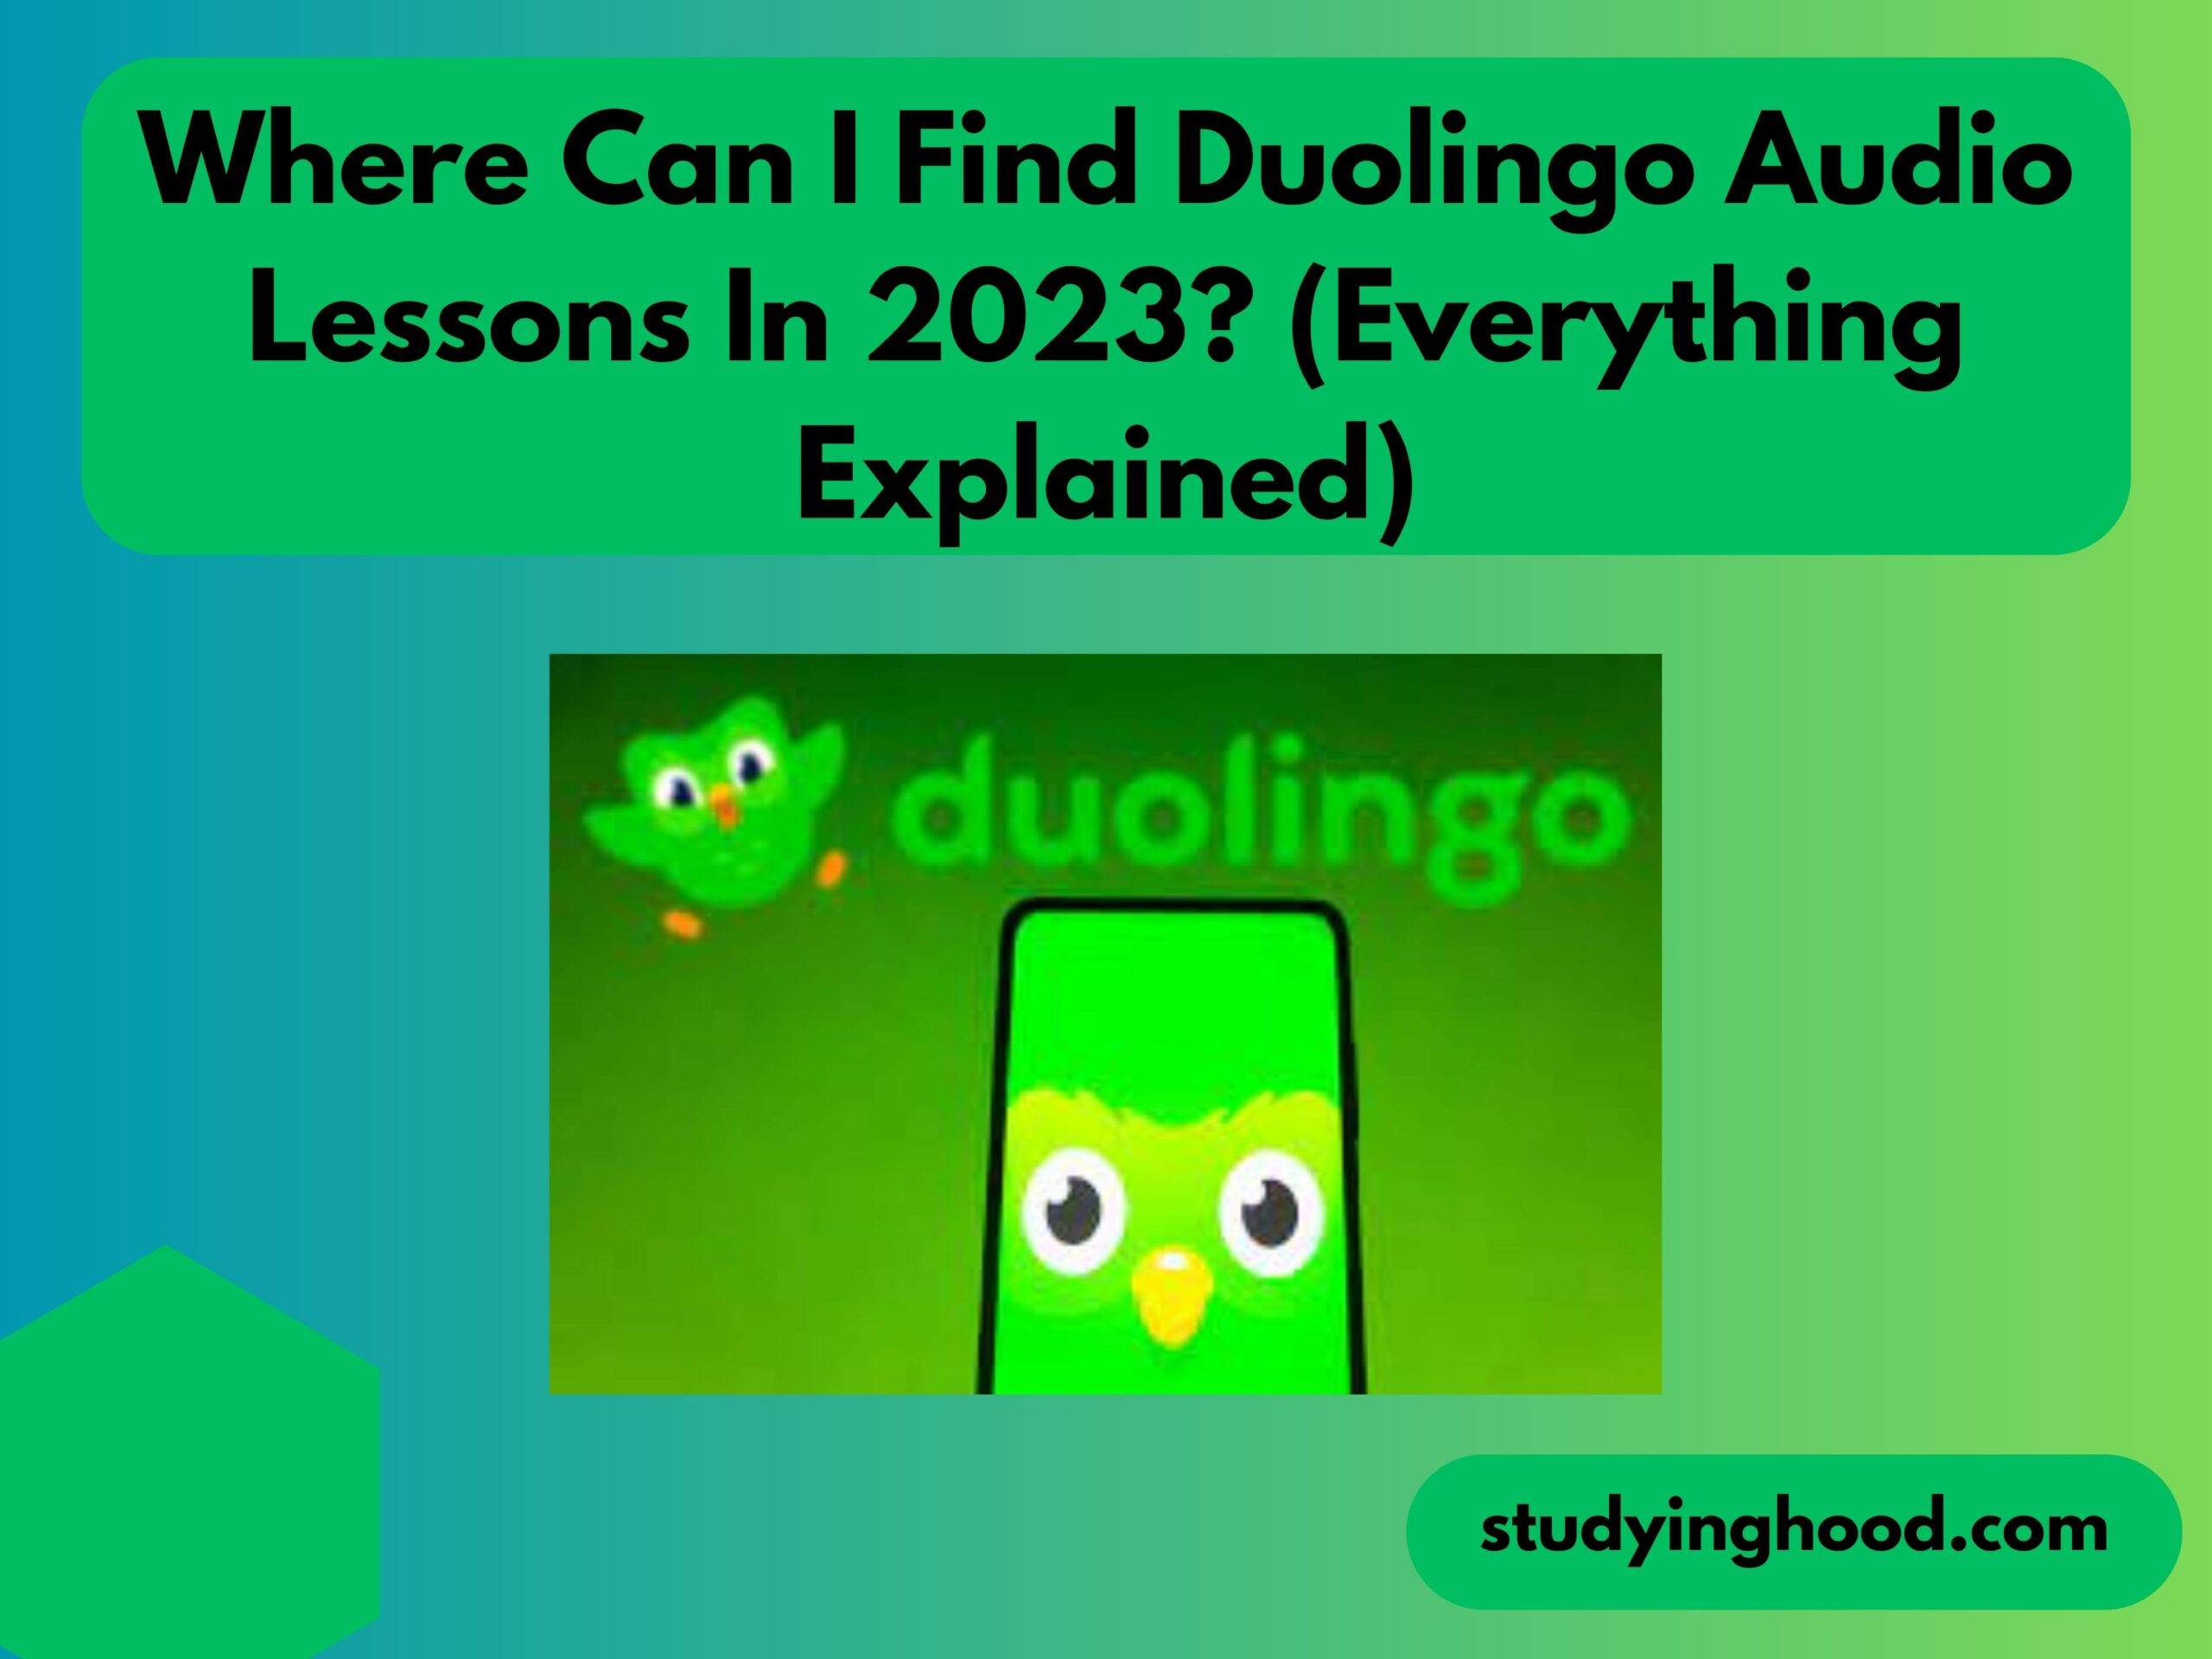 Where Can I Find Duolingo Audio Lessons In 2023? (Everything Explained)